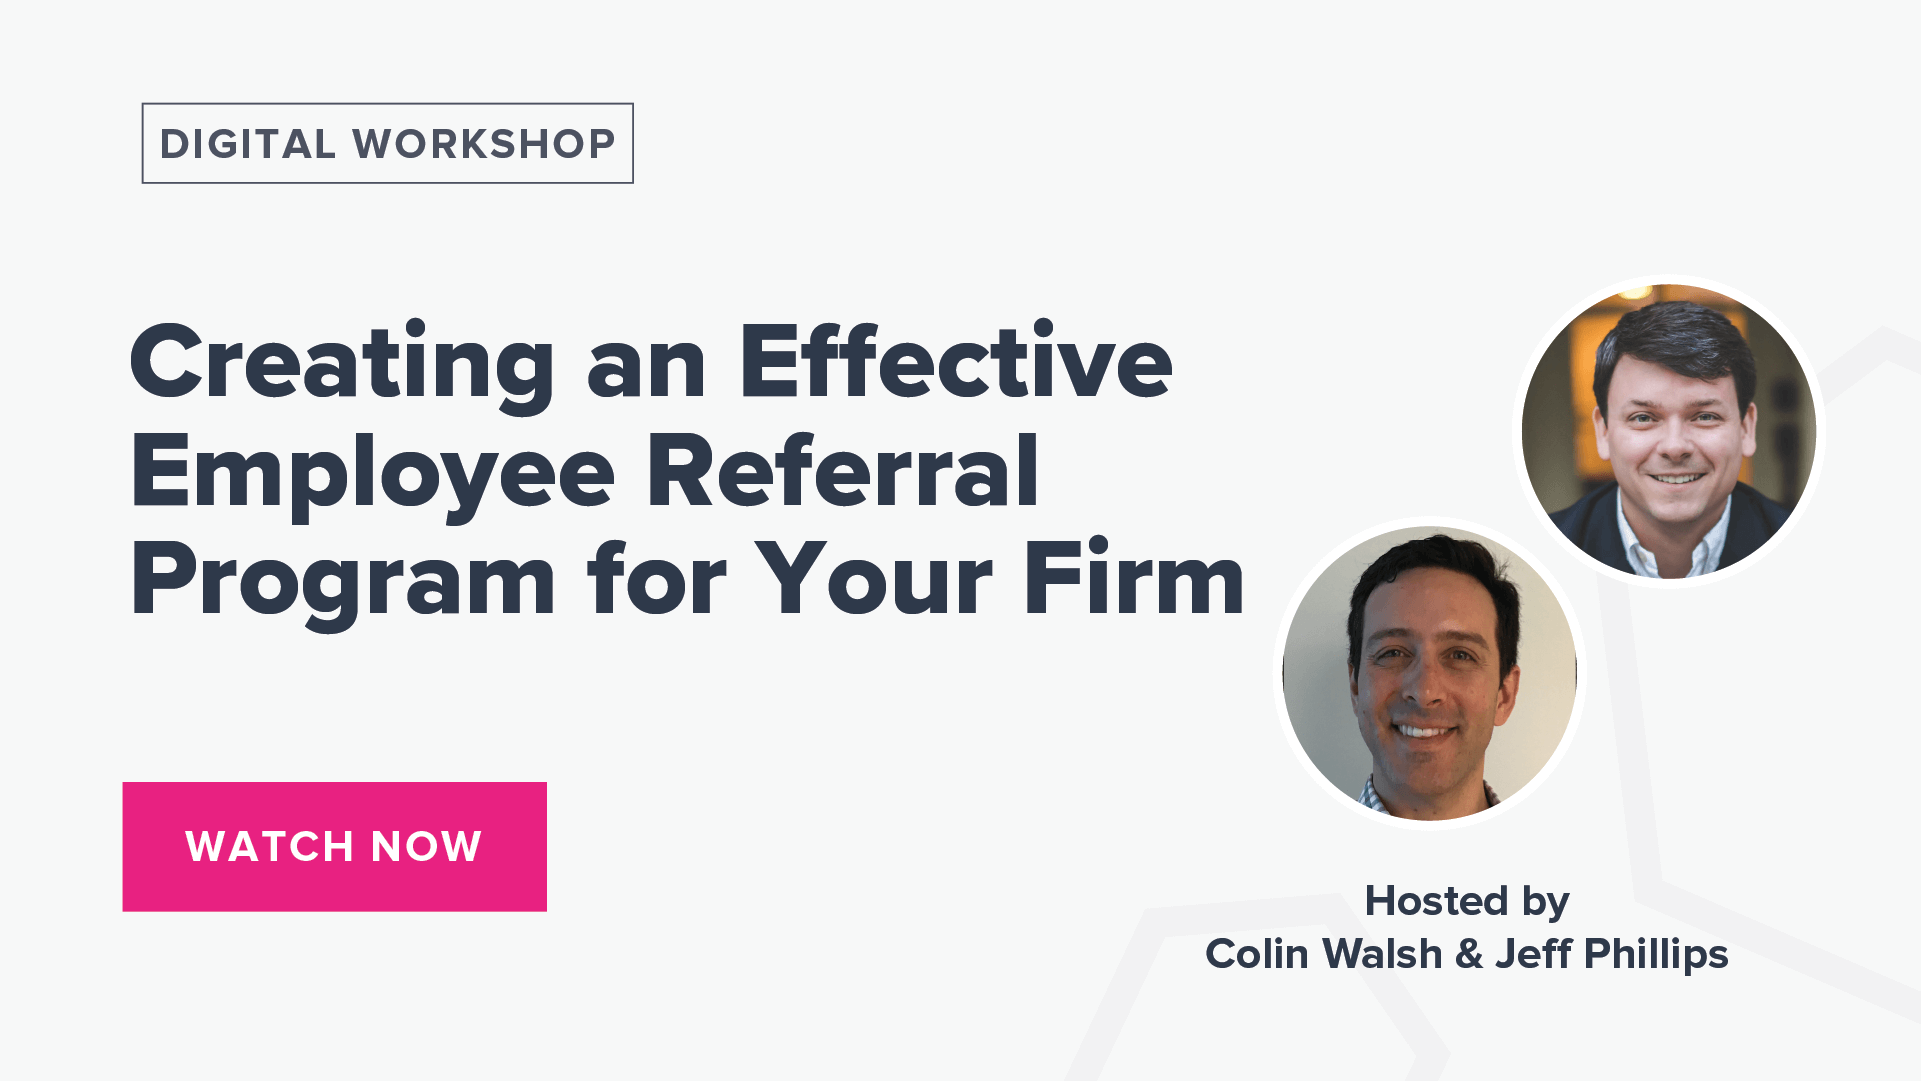 Creating an Effective Employee Referral Program for Your Firm